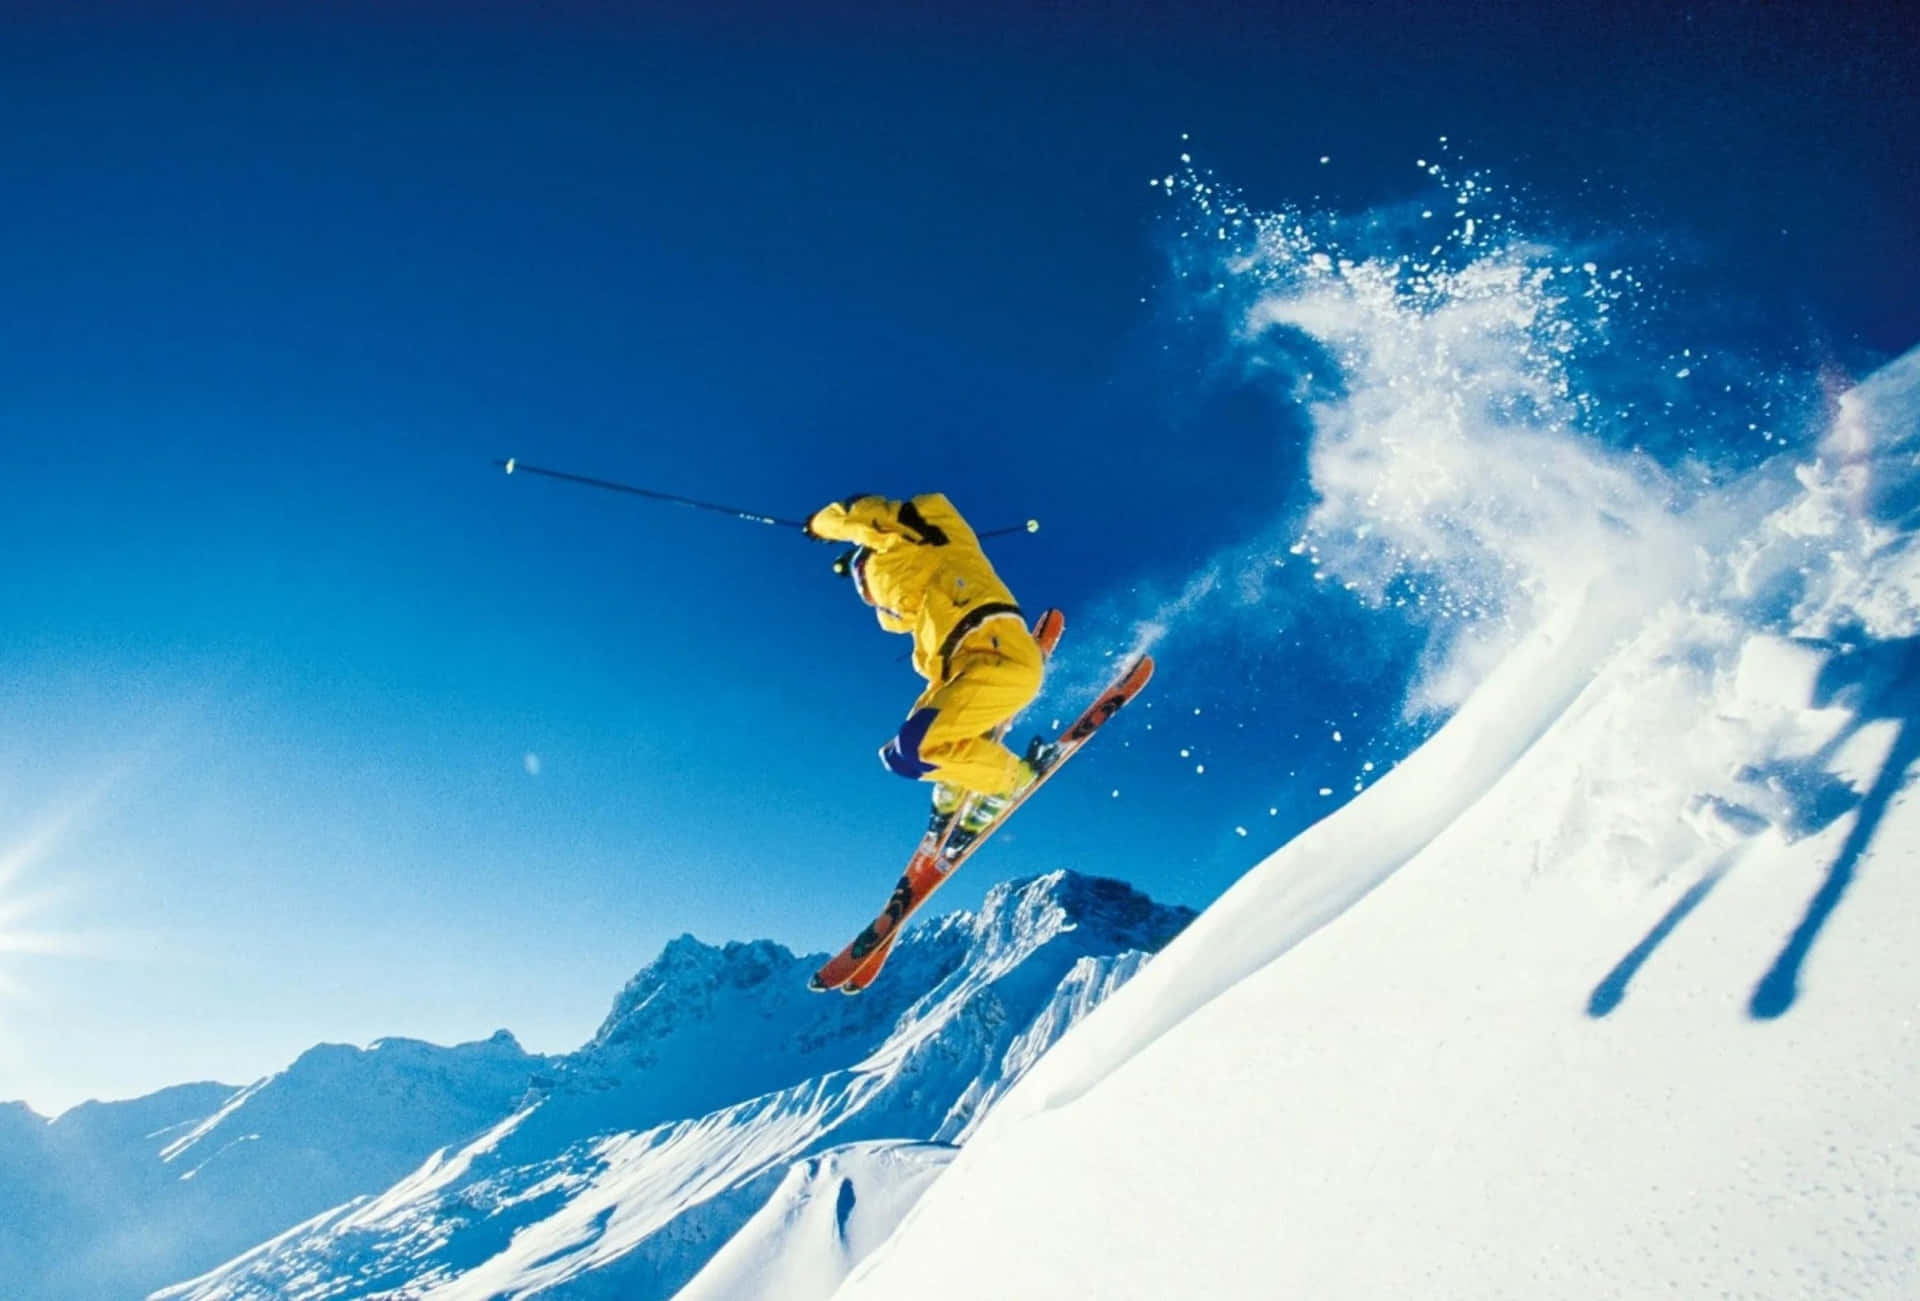 Skiing at its Finest Wallpaper